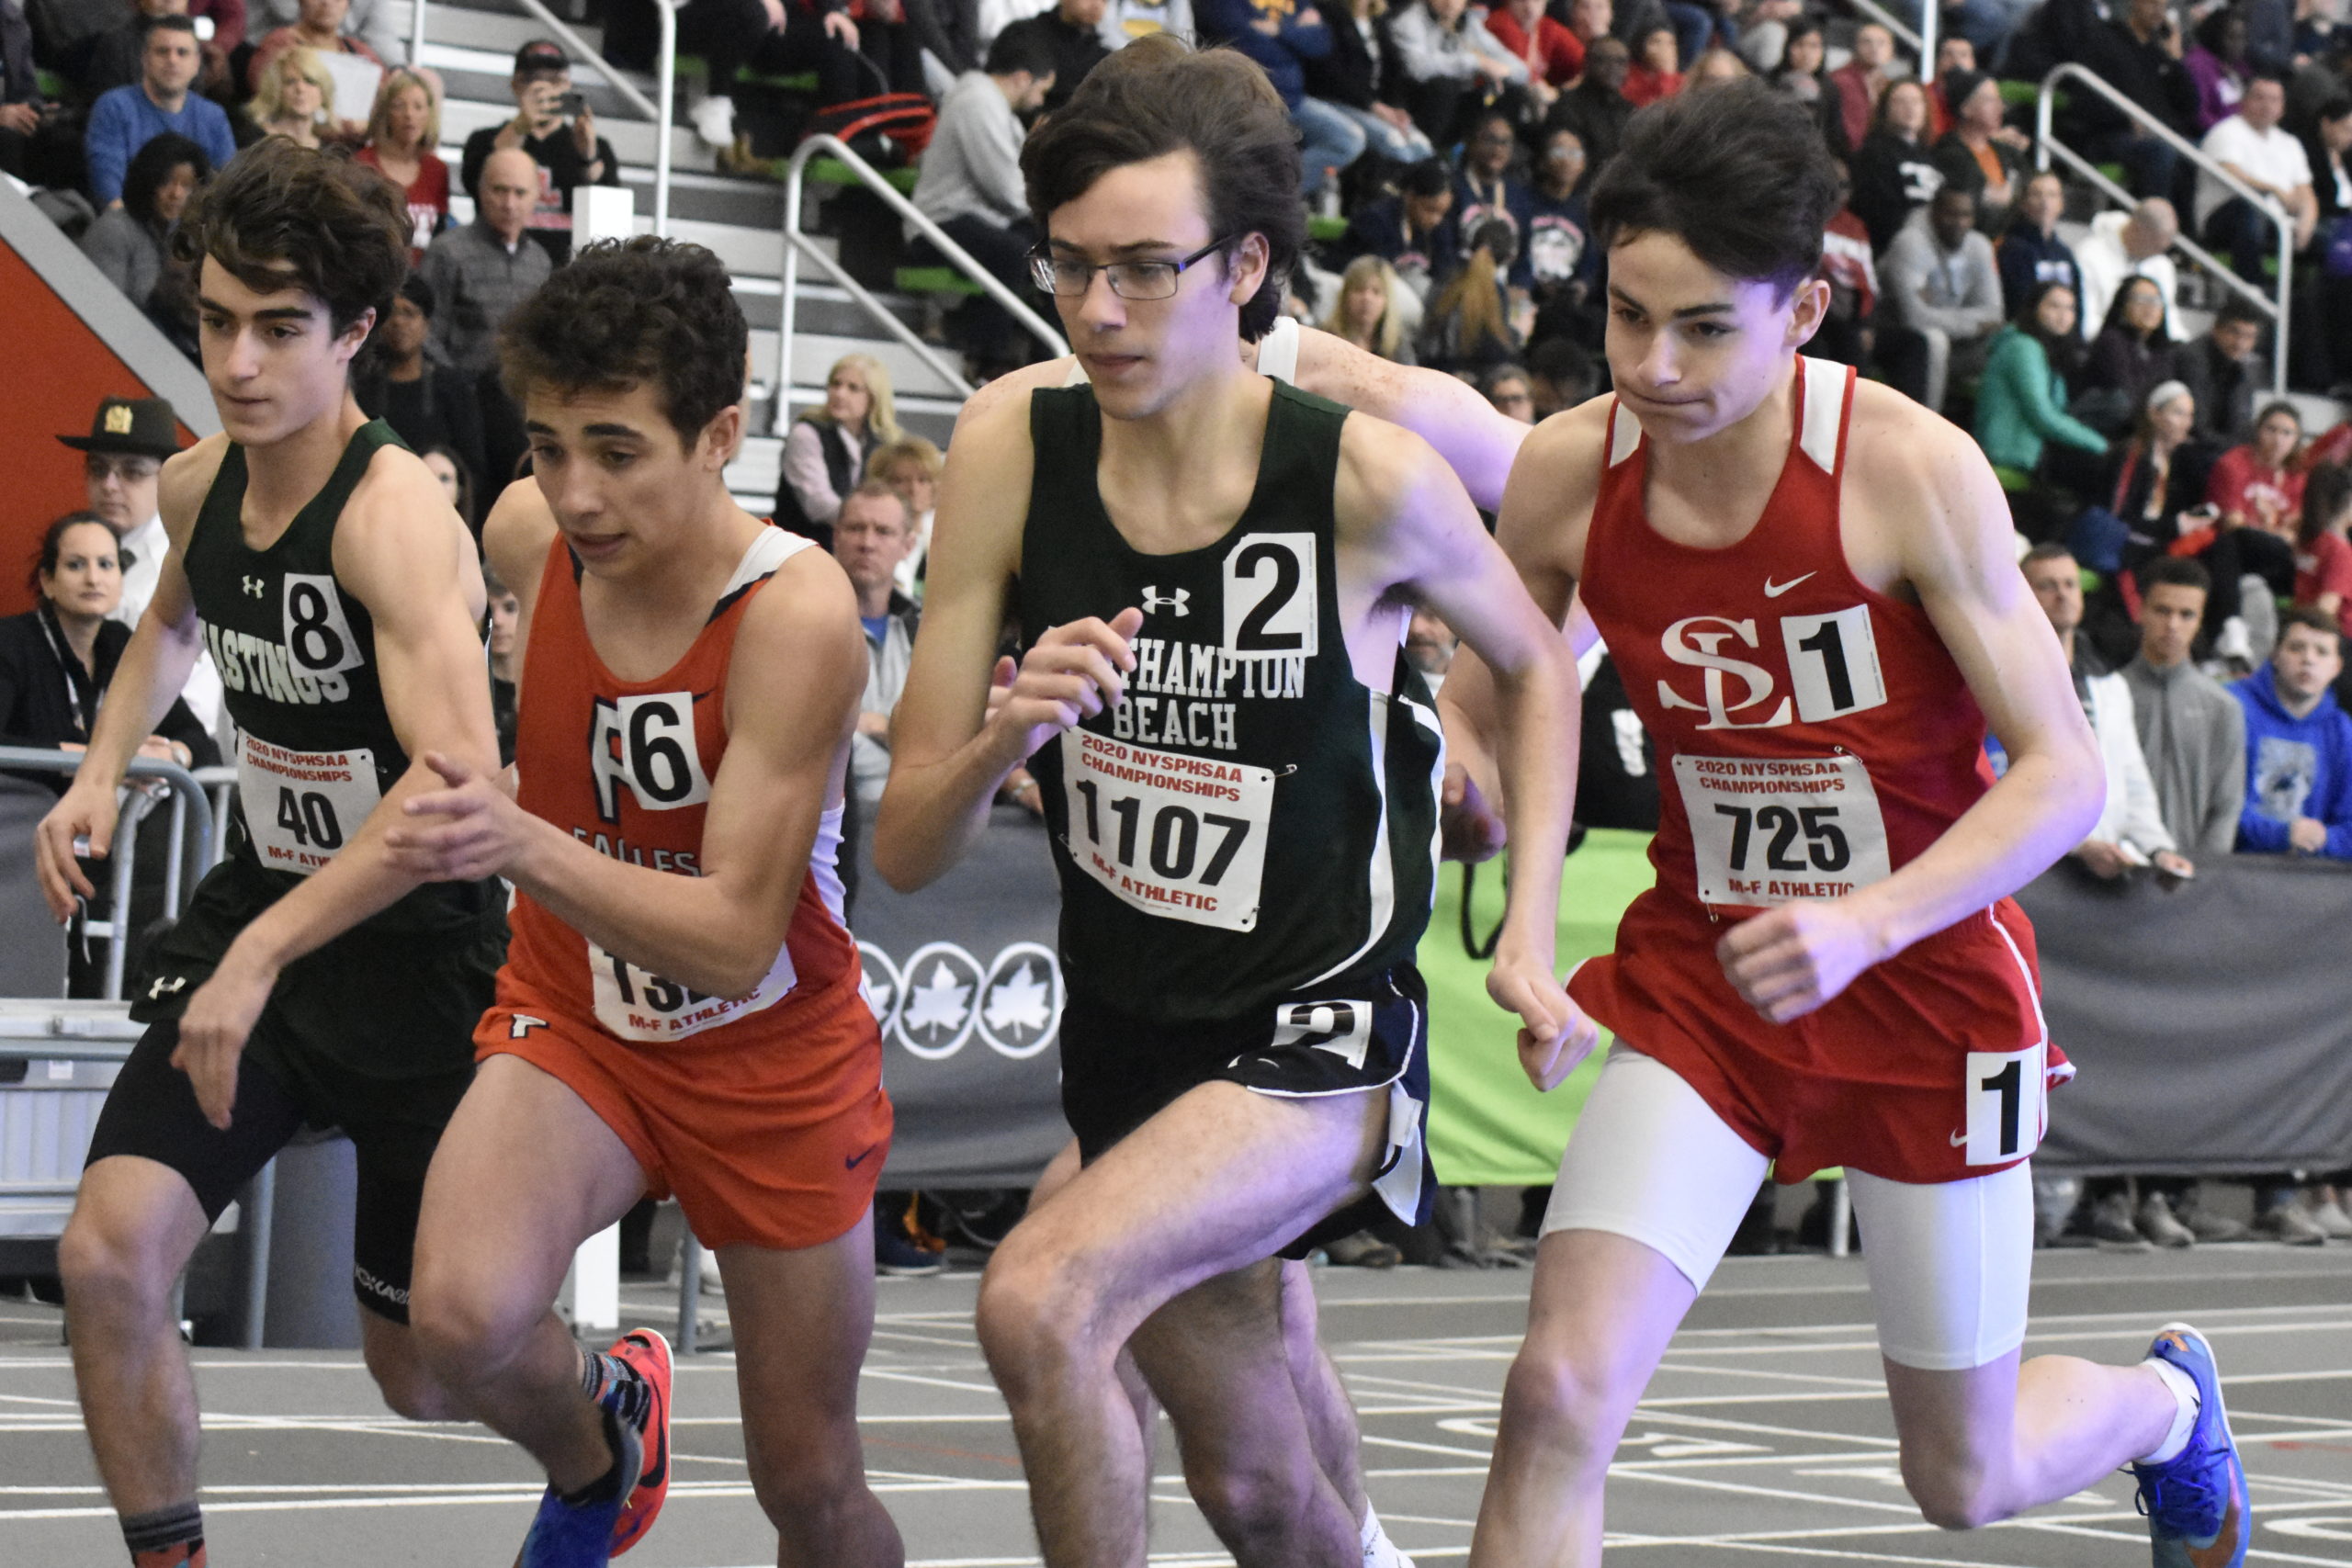 Westhampton Beach sophomore Gavin Ehlers starts the 3,200-meter race at the New York State Indoor Track and Field Championships on Saturday.